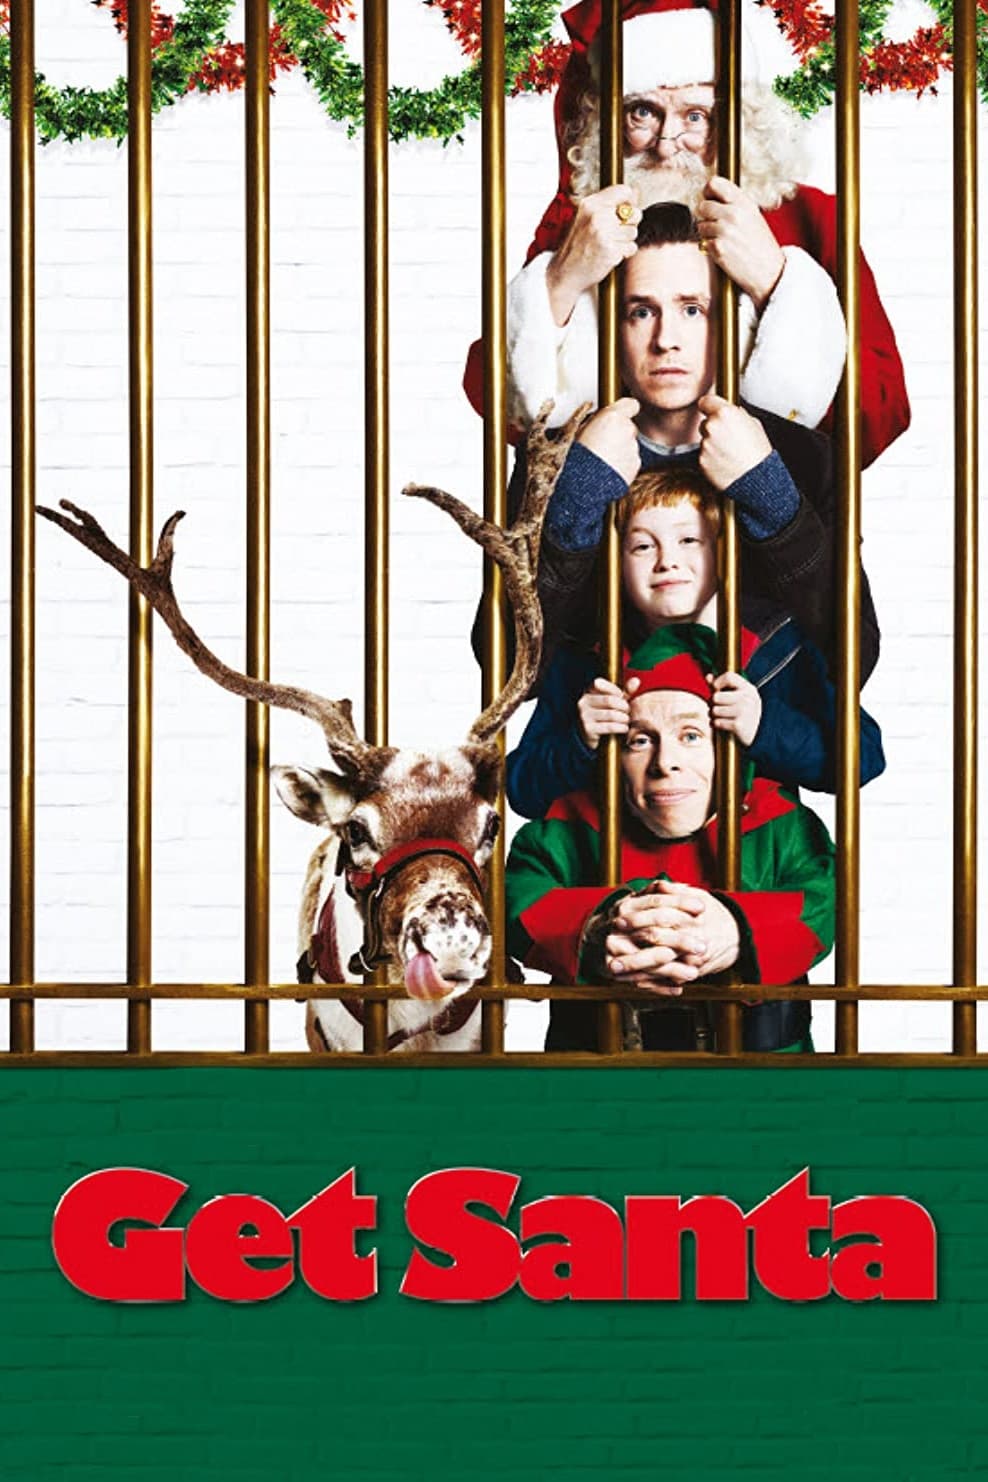 Poster for the movie "Get Santa"